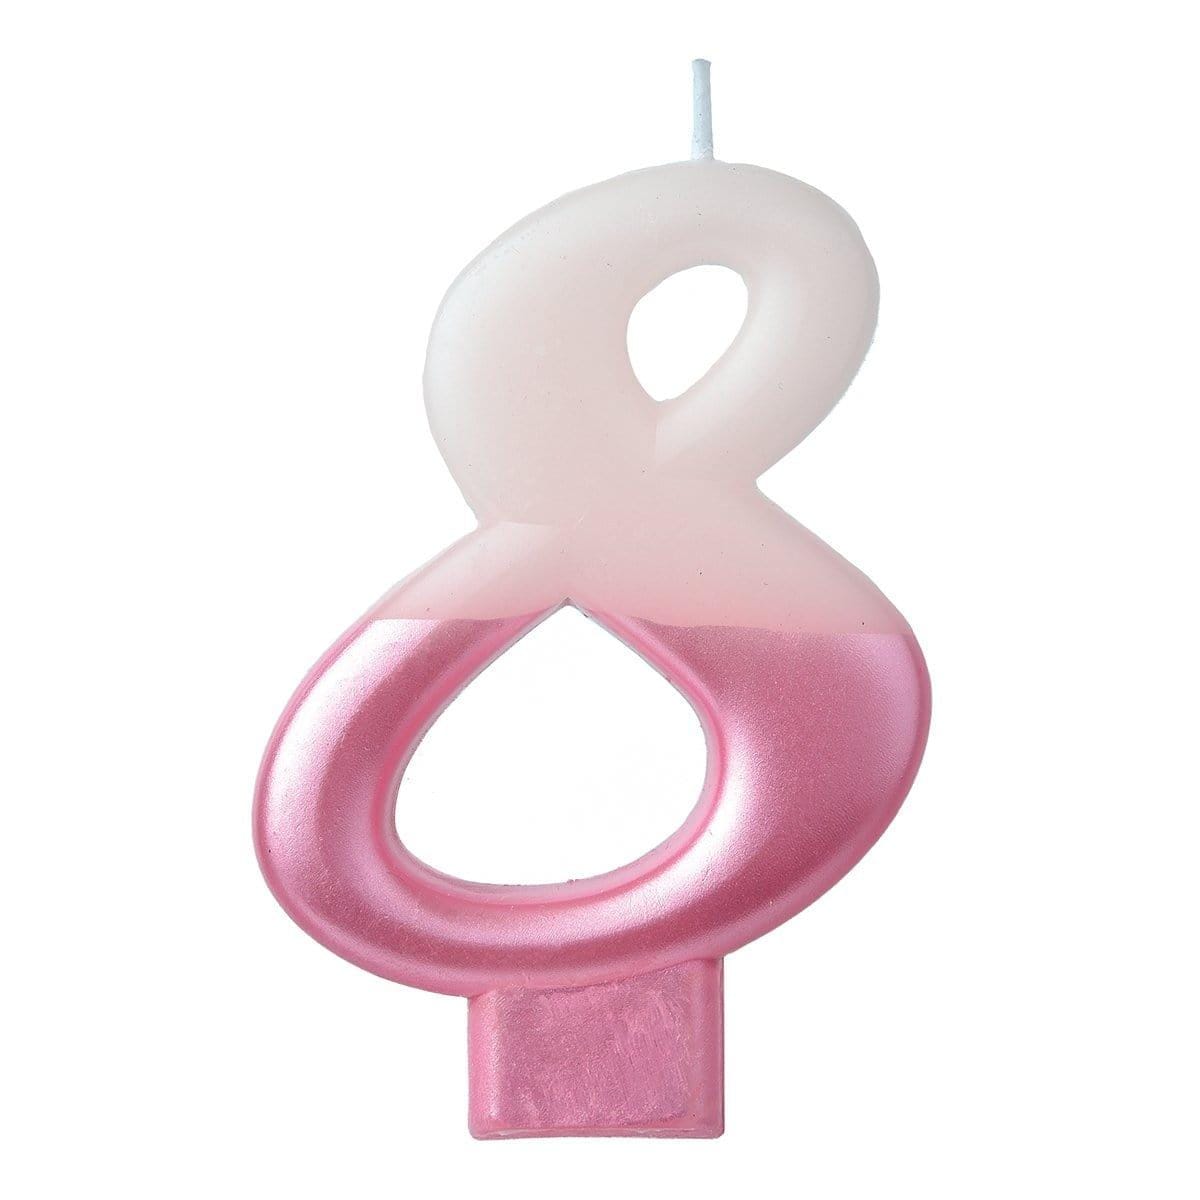 Buy Cake Supplies Pink Numeral Candle #8 sold at Party Expert